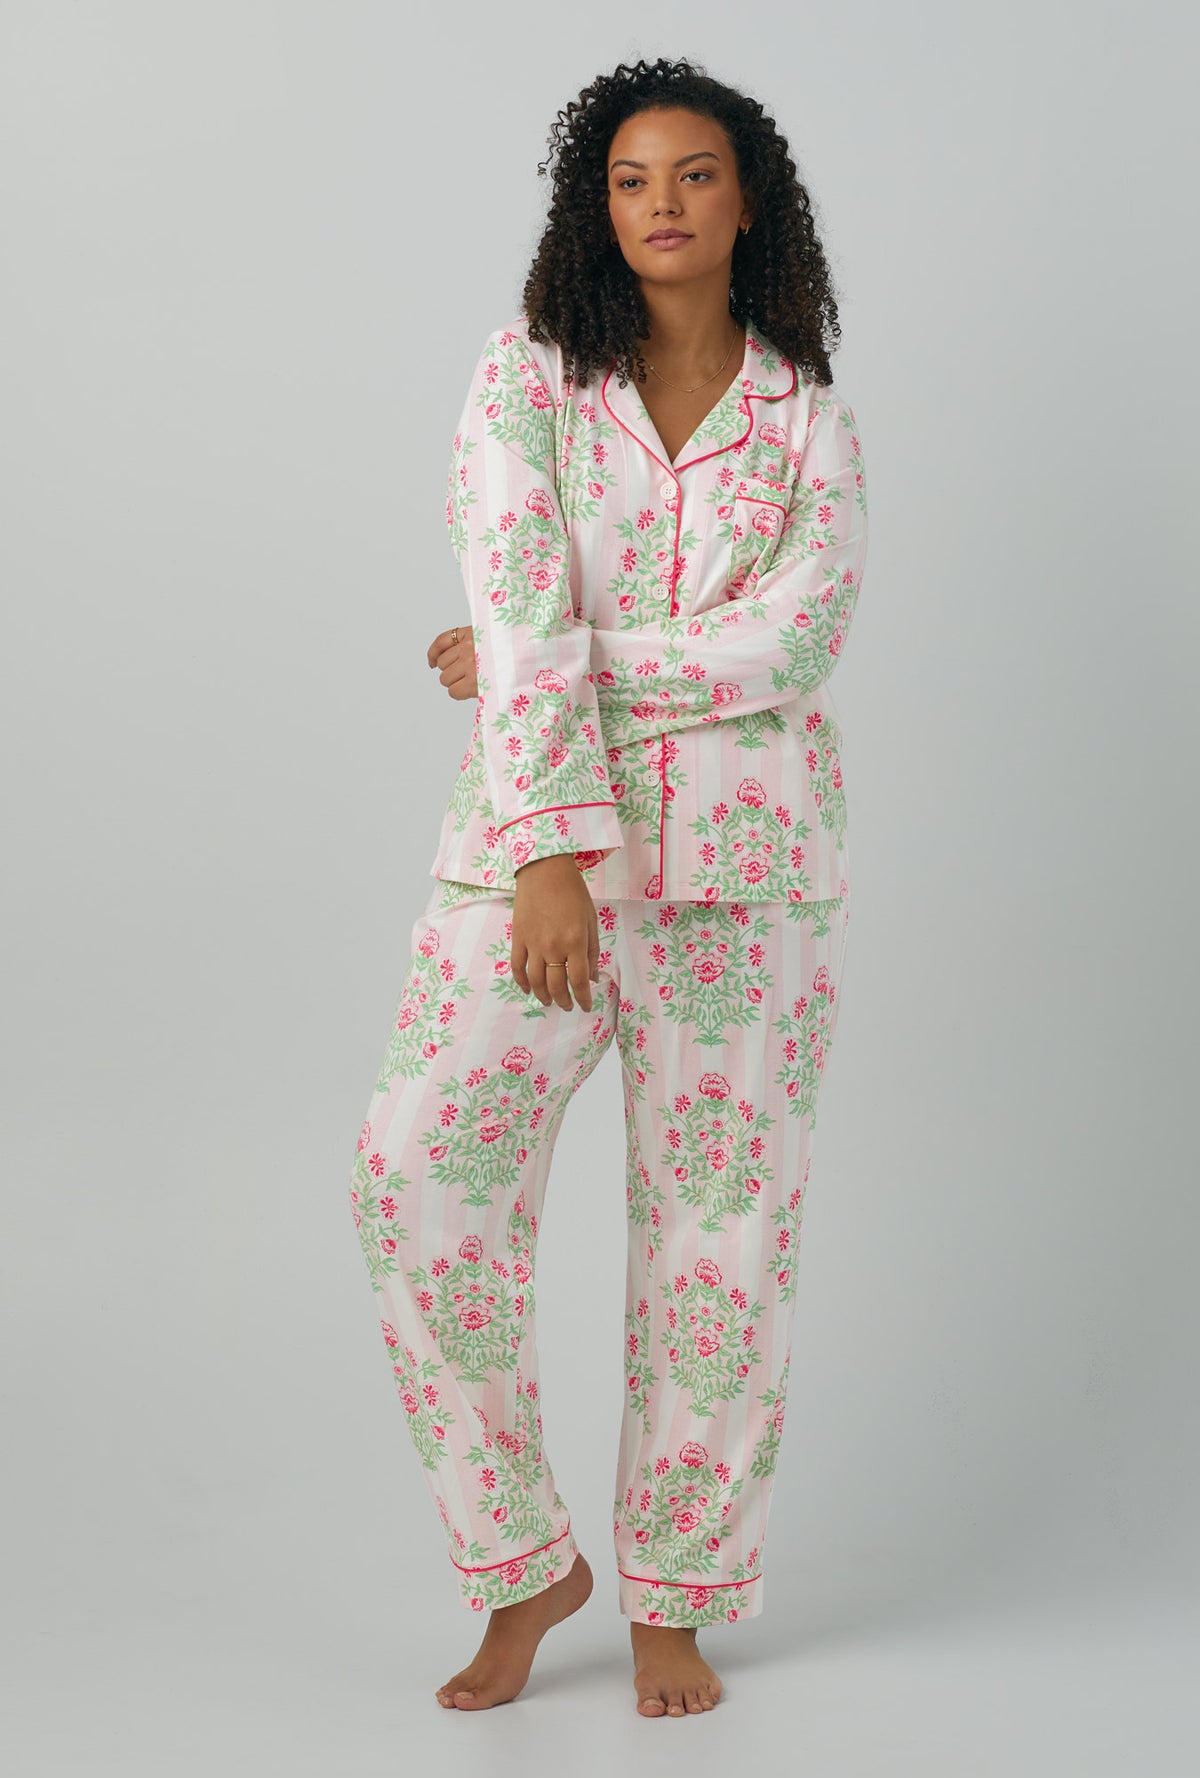 A lady wearing Long Sleeve Classic Stretch Jersey PJ Set with Estate Bouquet prints